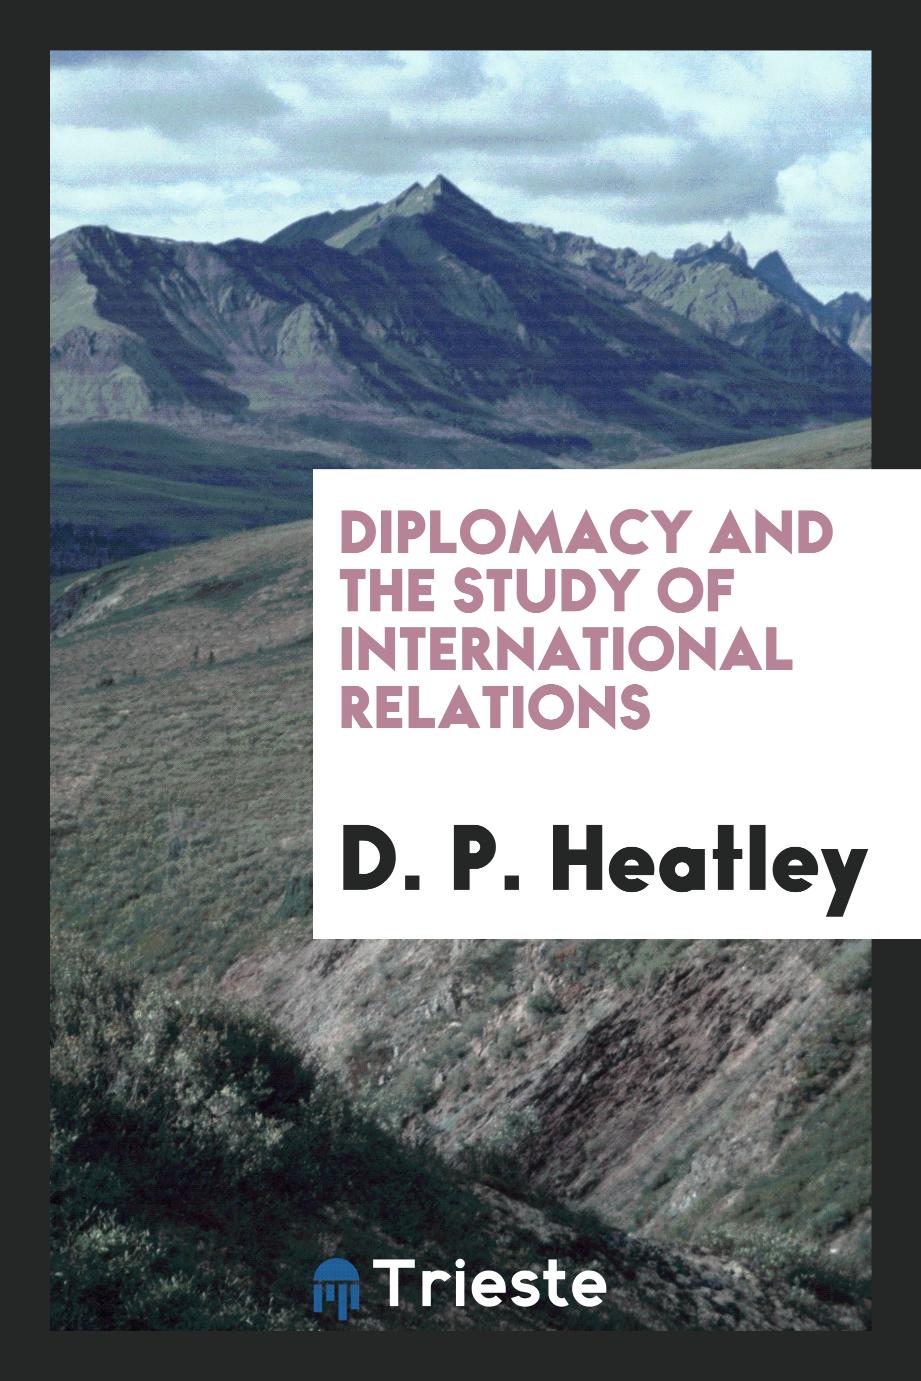 Diplomacy and the Study of International Relations